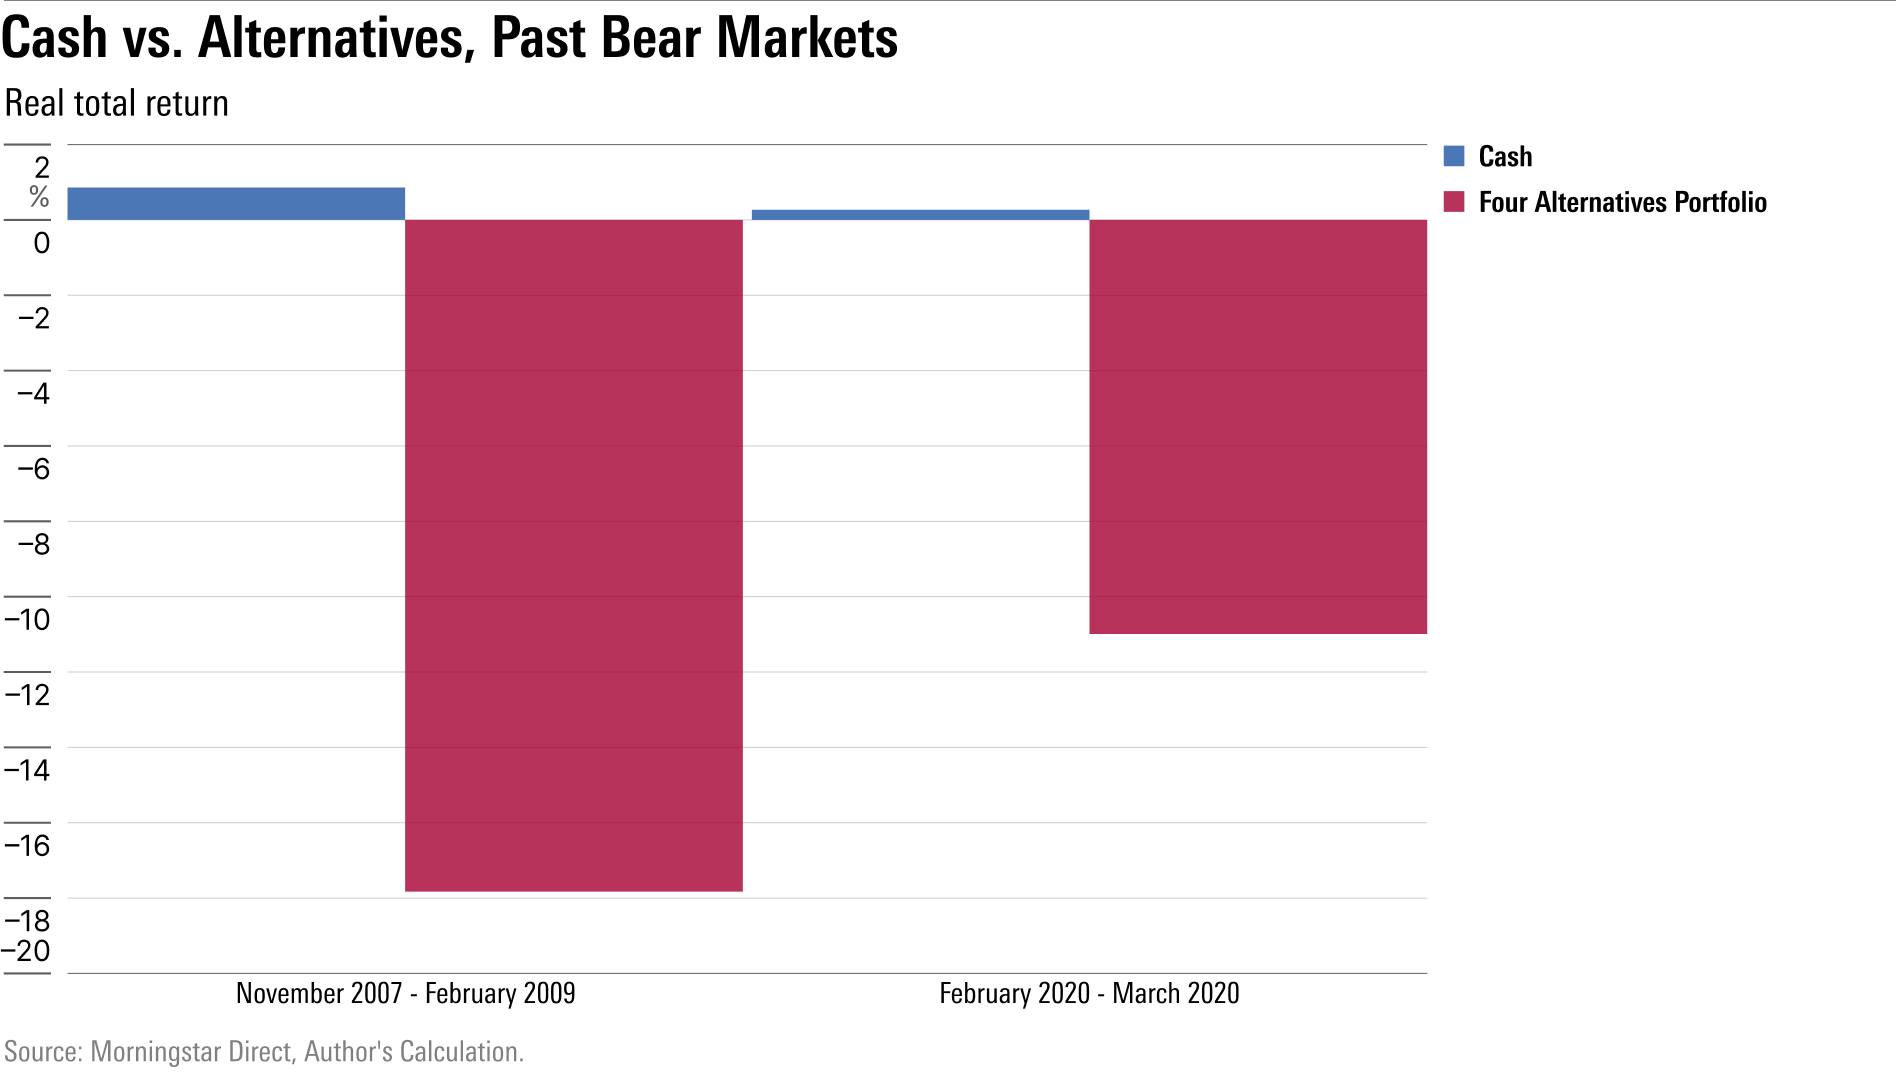 Bar chart of the performance of cash vs alternative investments after inflation, in two previous bear markets.